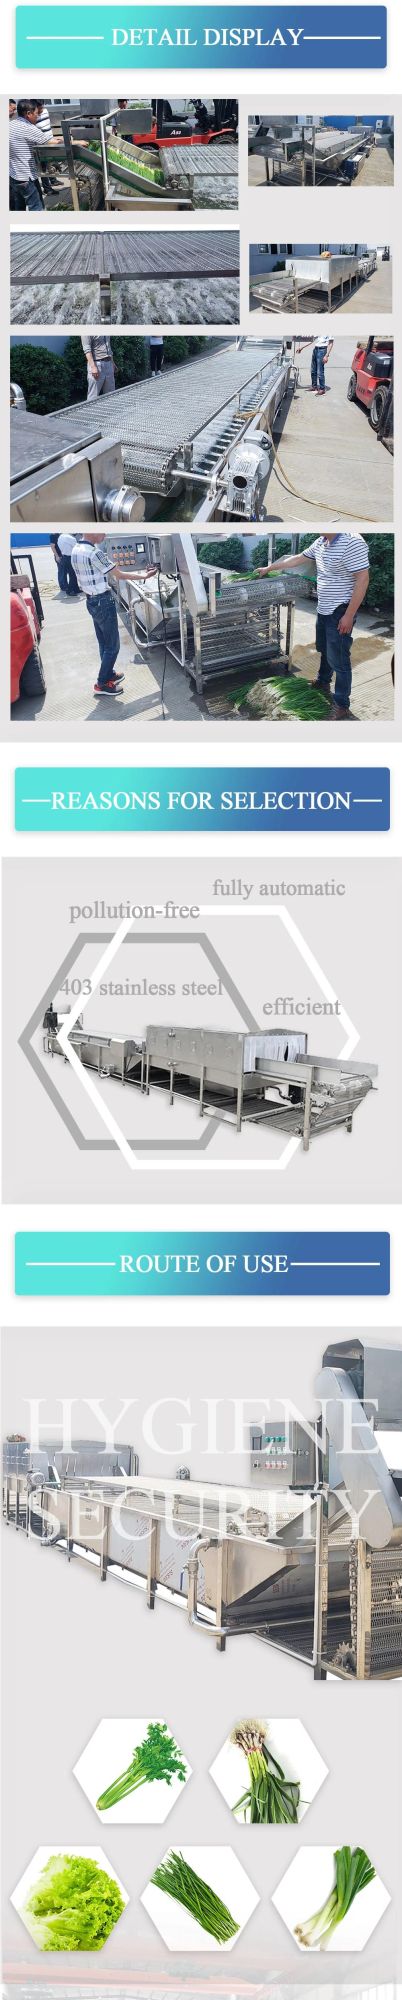 Full Automatic 304ss Factory Price Fruits Vegetables Air Bubble Washer